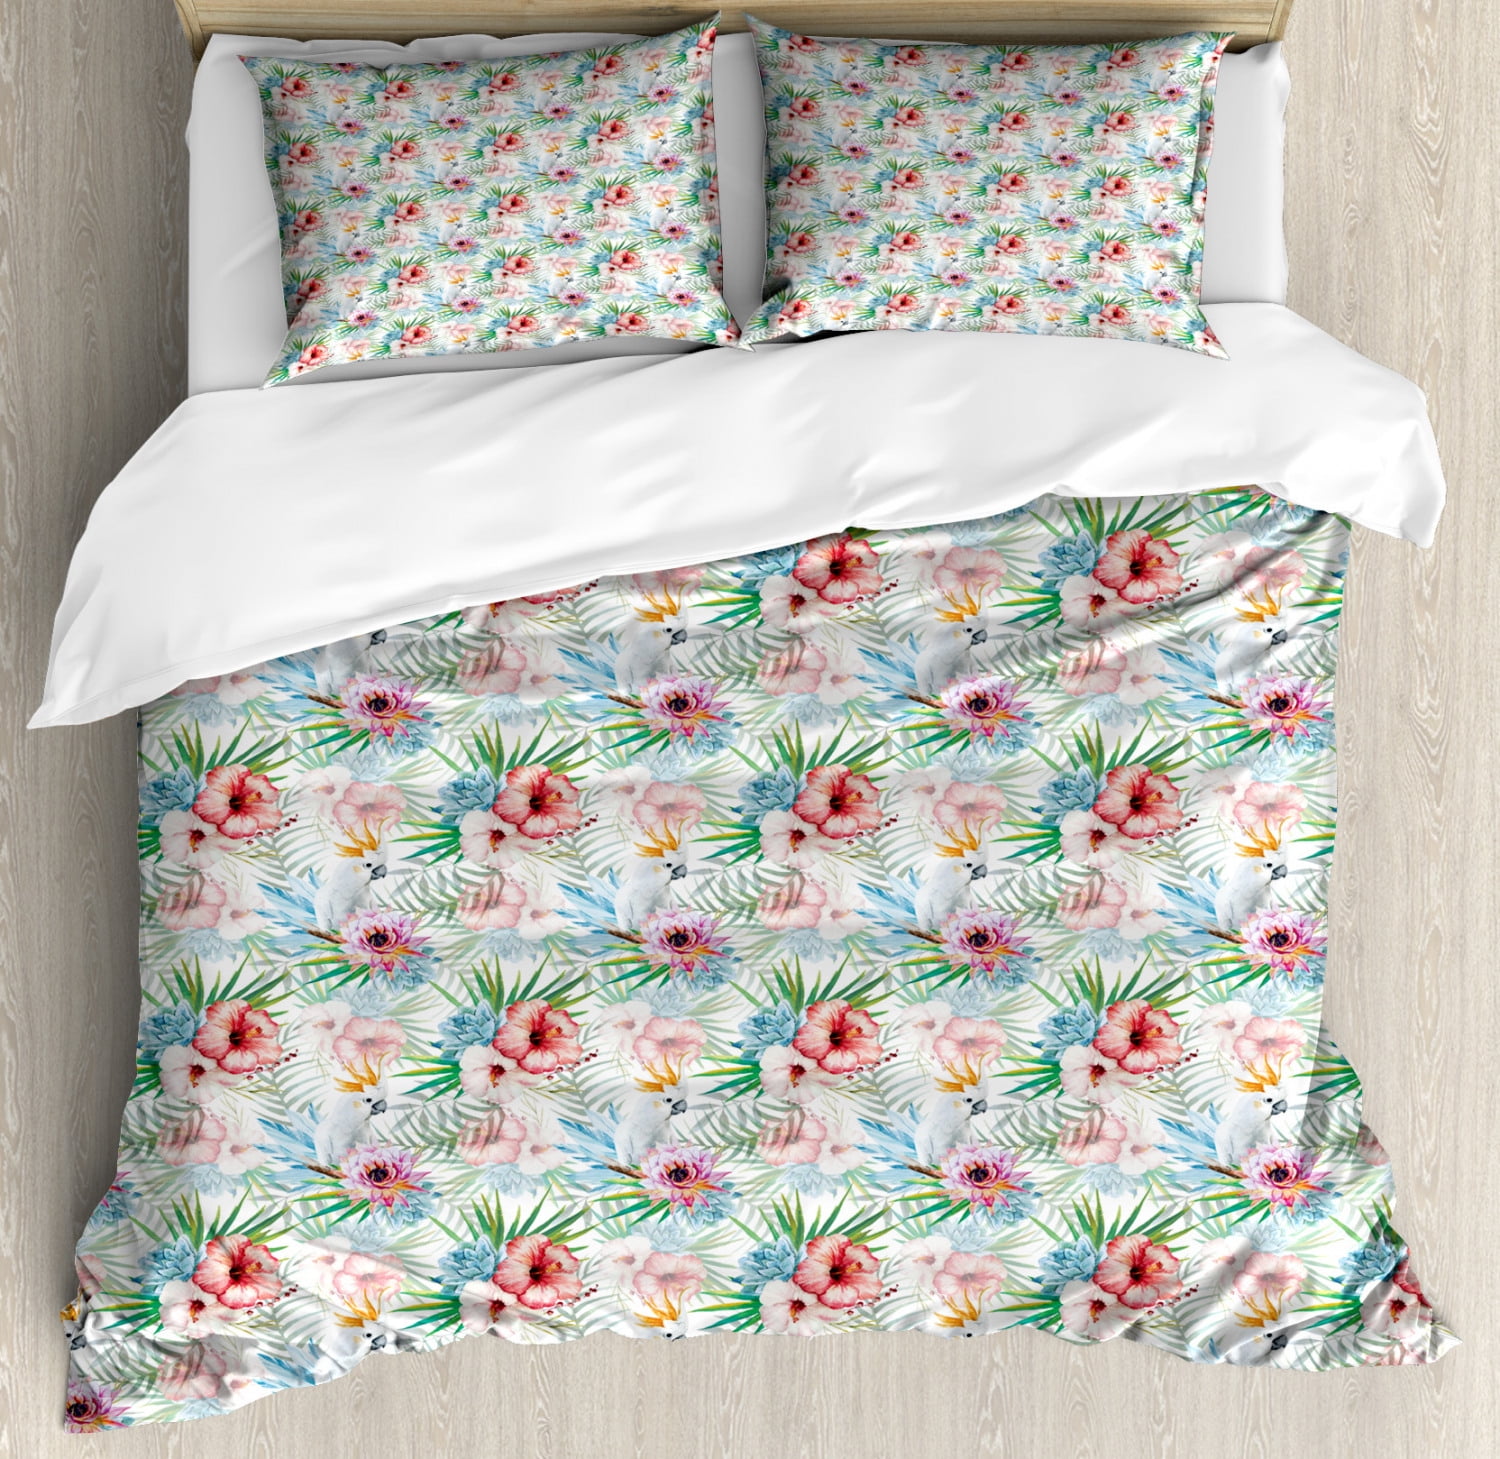 Tropical Duvet Cover Set King Size Exotic Hibiscuses And Parrots